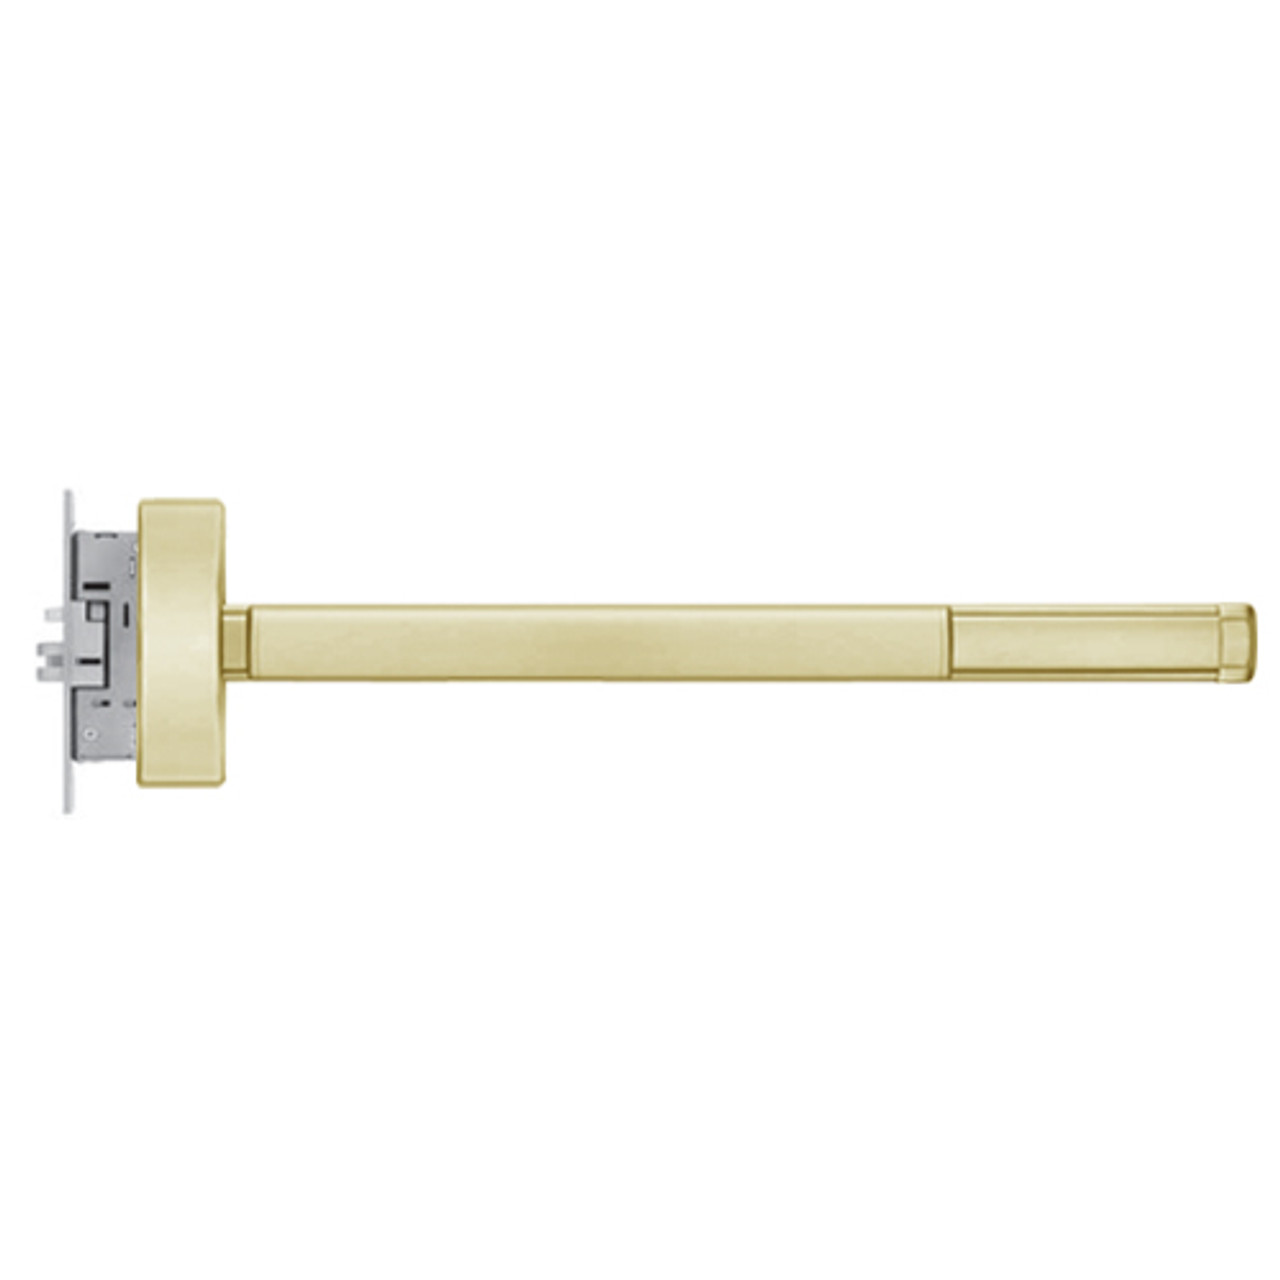 TS2308-RHR-606-36 PHI 2300 Series Apex Mortise Exit Device with Touchbar Monitoring Switch Prepped for Key Controls Lever/Knob in Satin Brass Finish